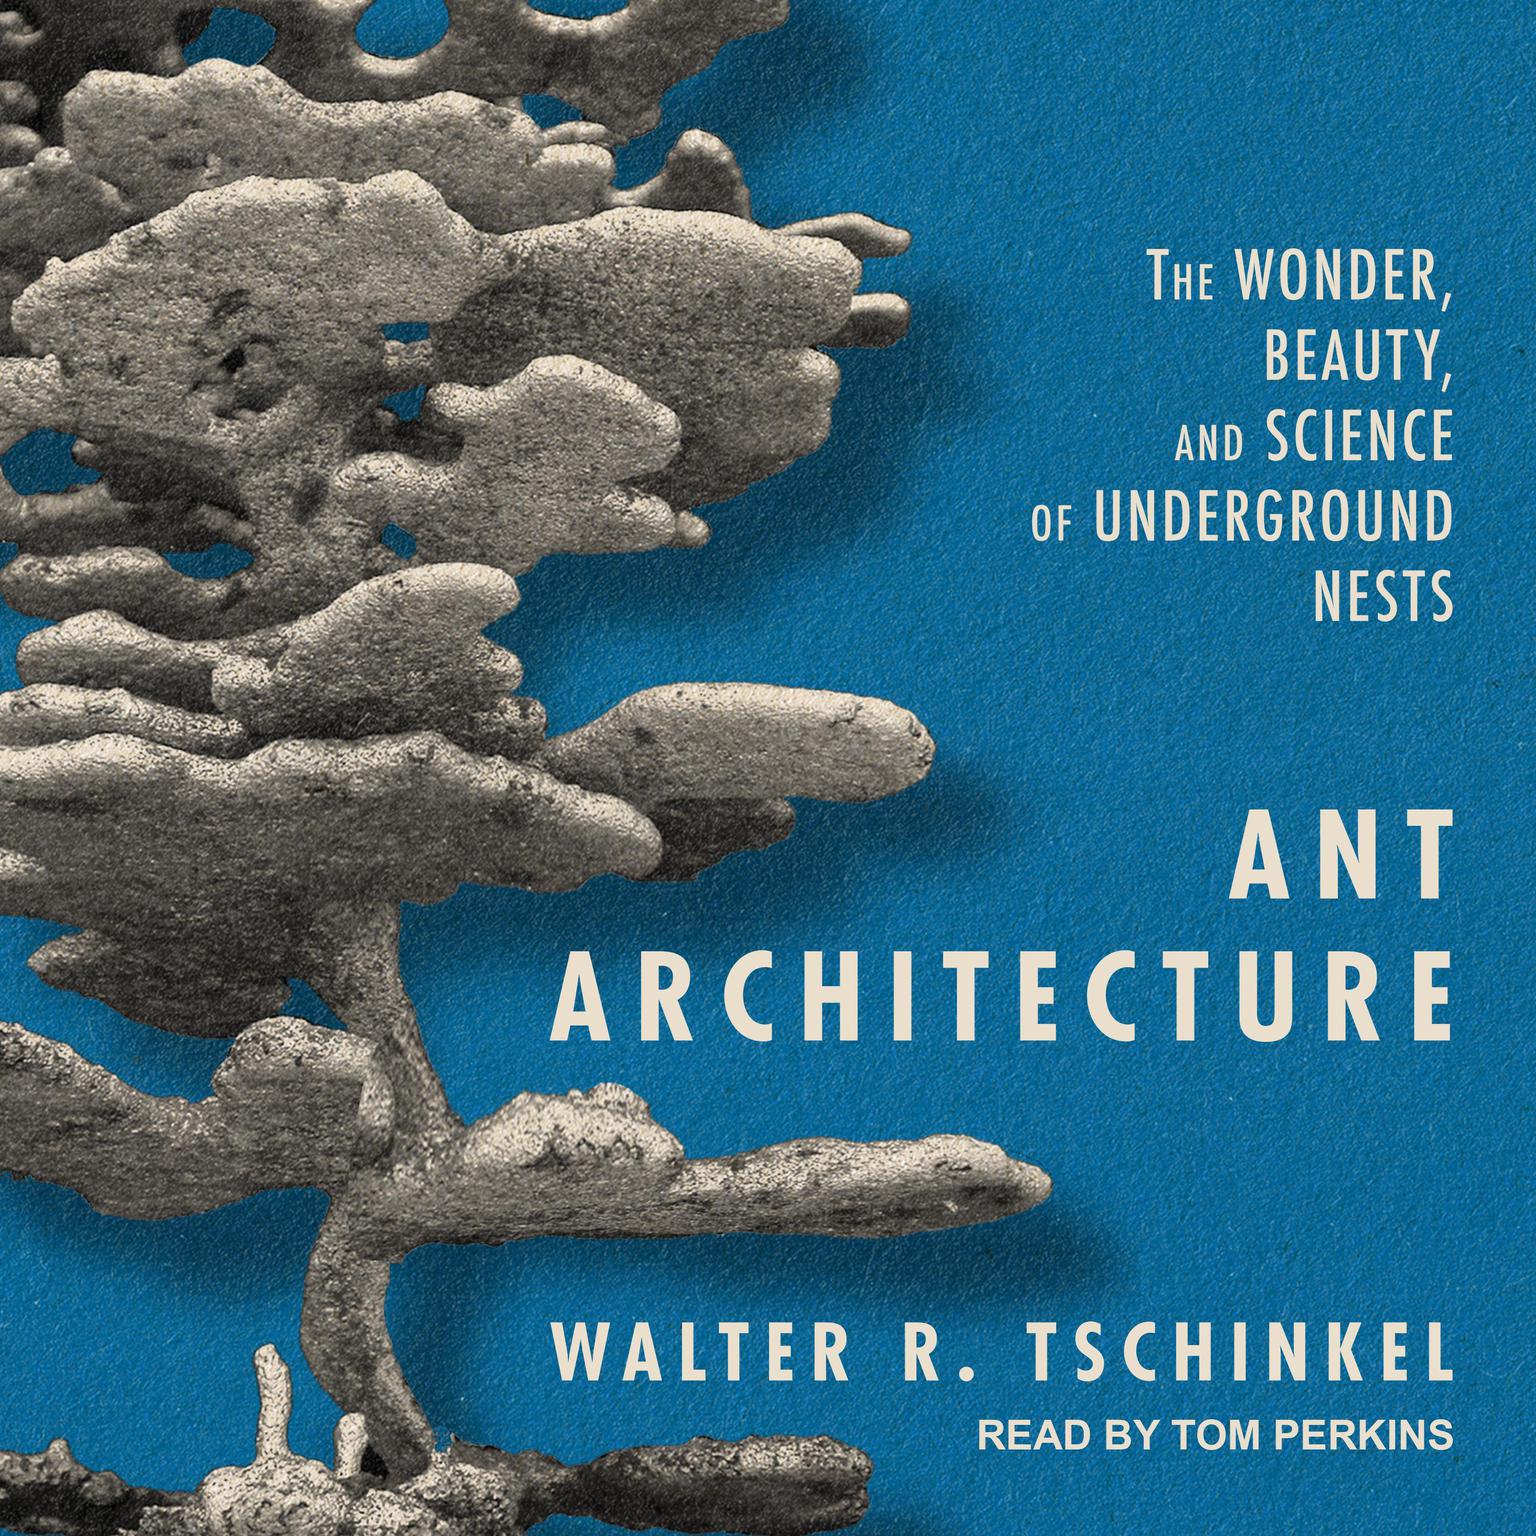 Ant Architecture: The Wonder, Beauty, and Science of Underground Nests Audiobook, by Walter R. Tschinkel